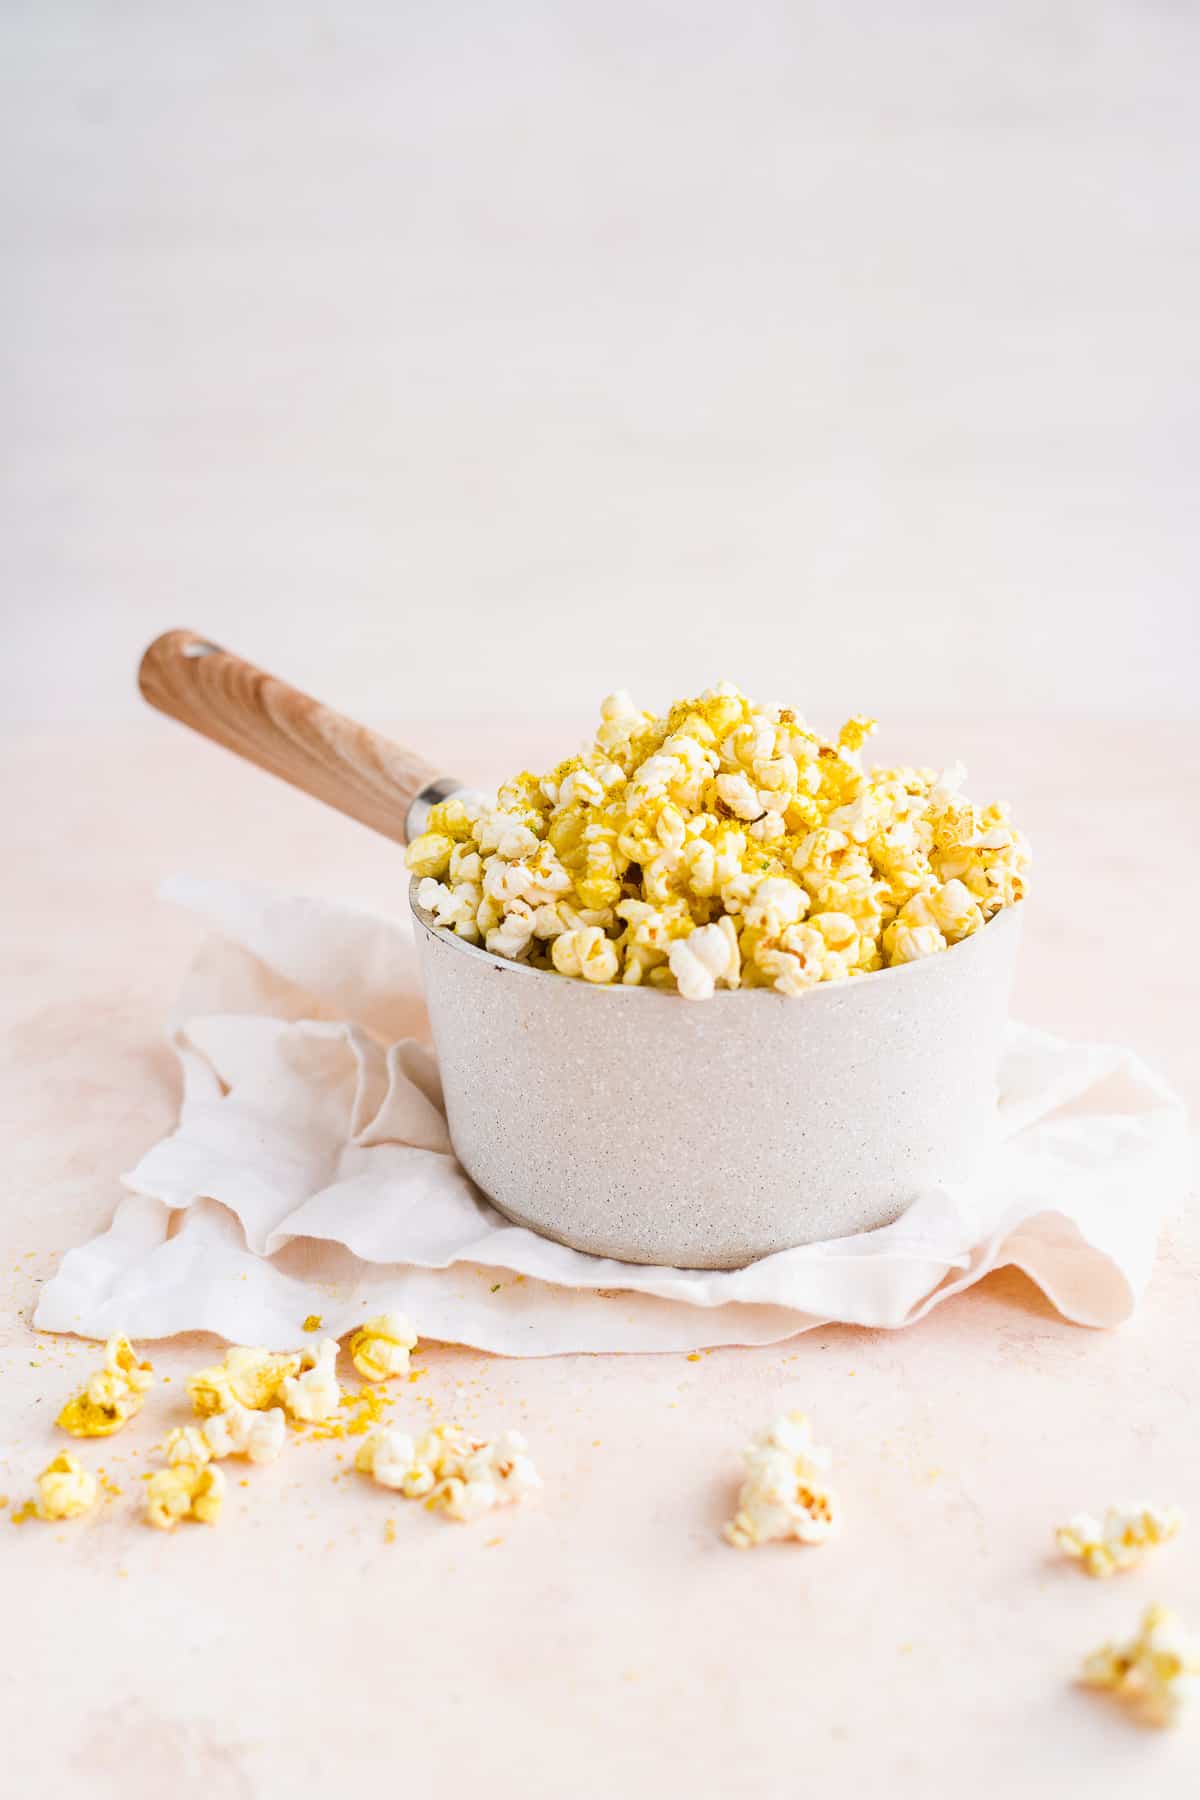 Grey pot overflowing with cheesy popcorn sitting on white linen.